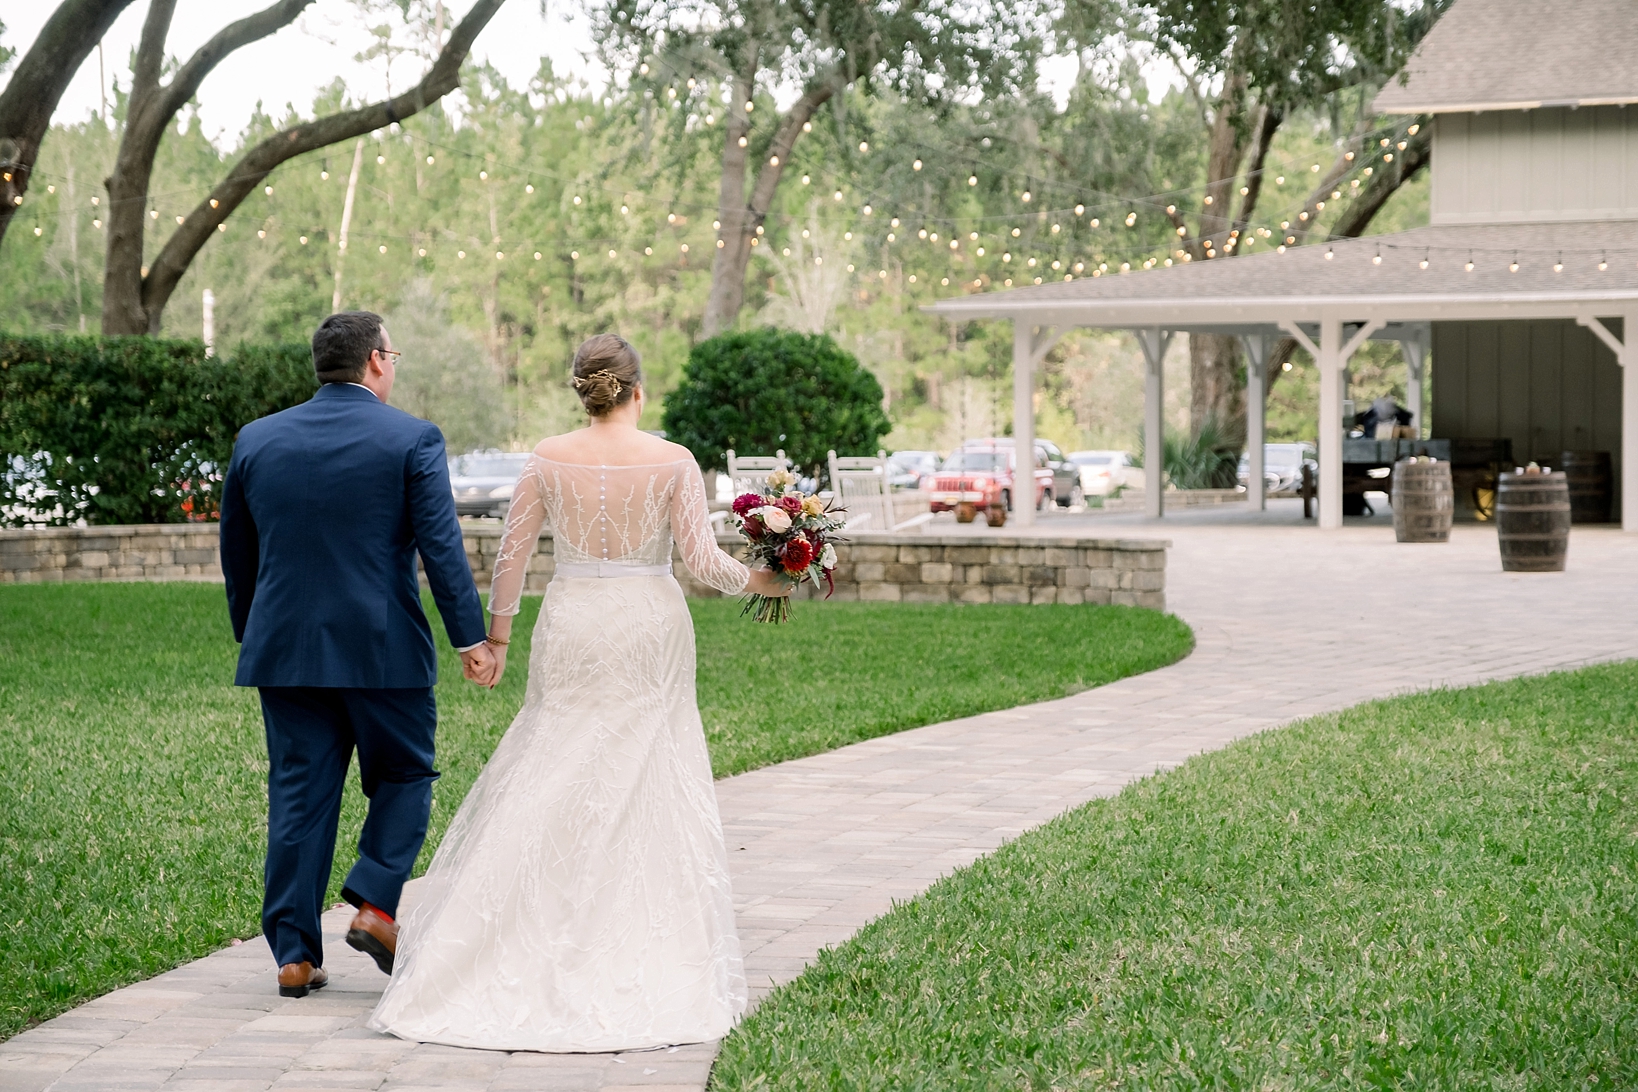 Bride and Groom walk back up the aisle to their wedding reception at Bowing Oaks Plantation